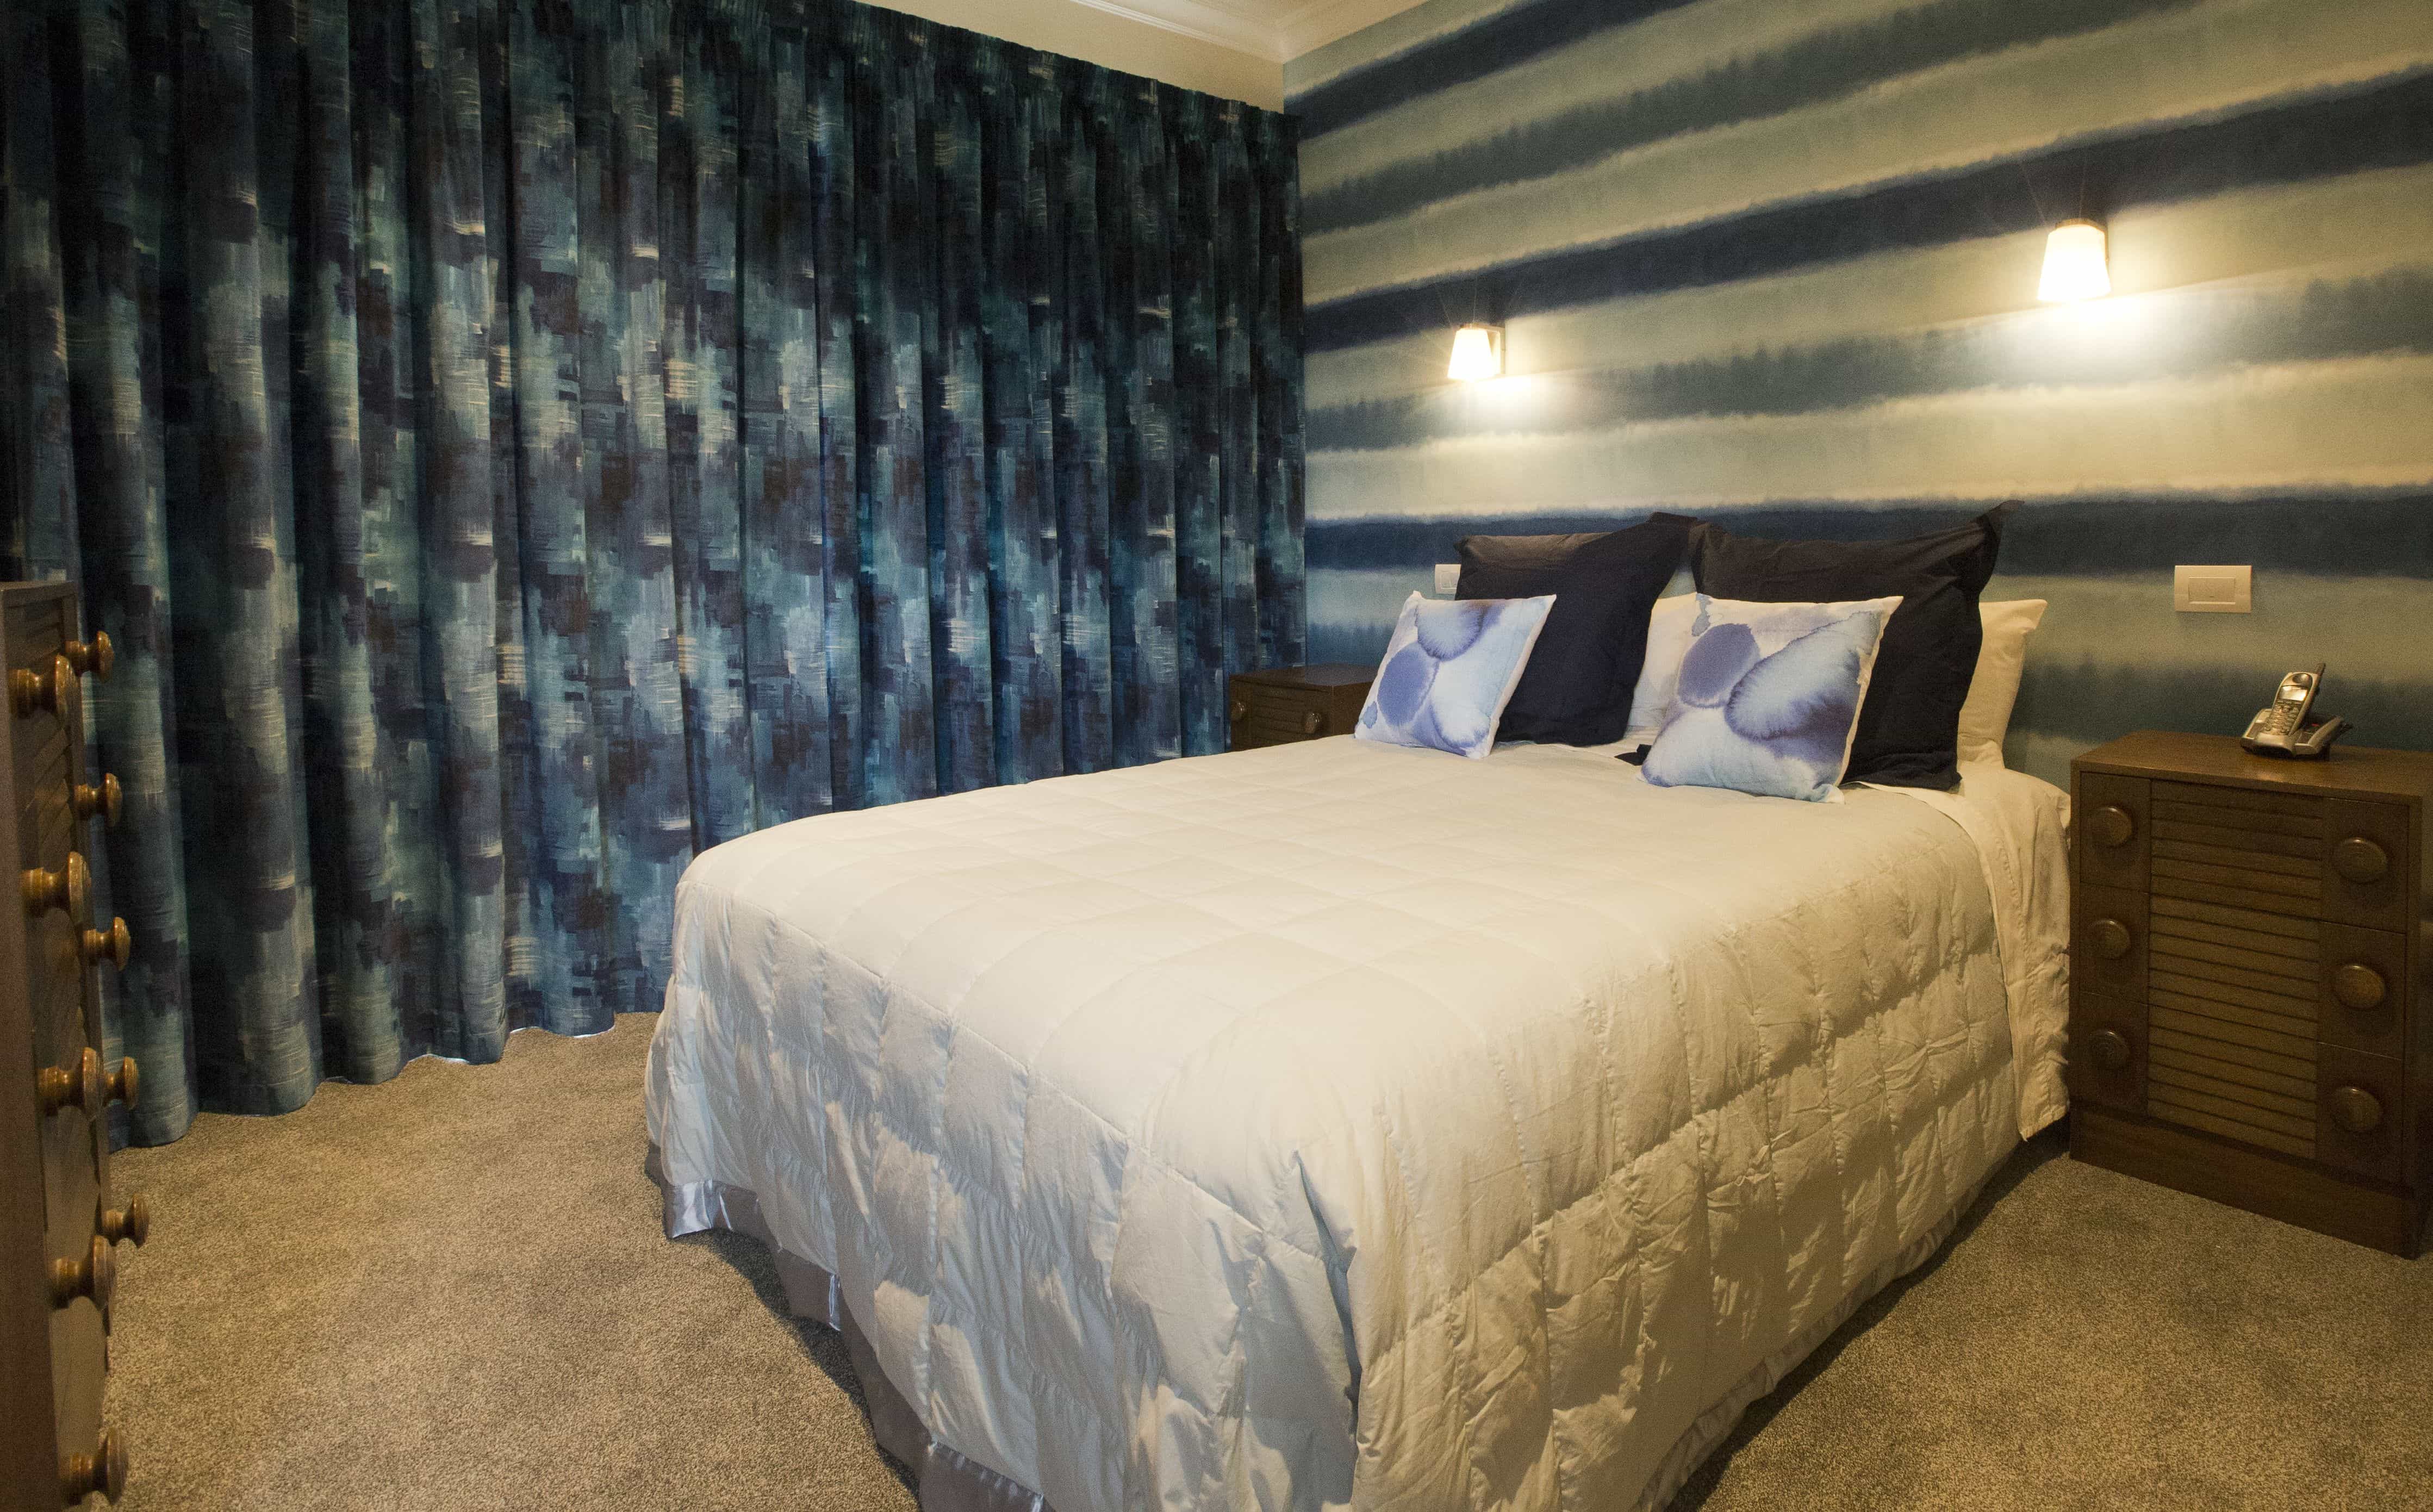  This is a second guest bedroom with wallpaper and curtains blending together